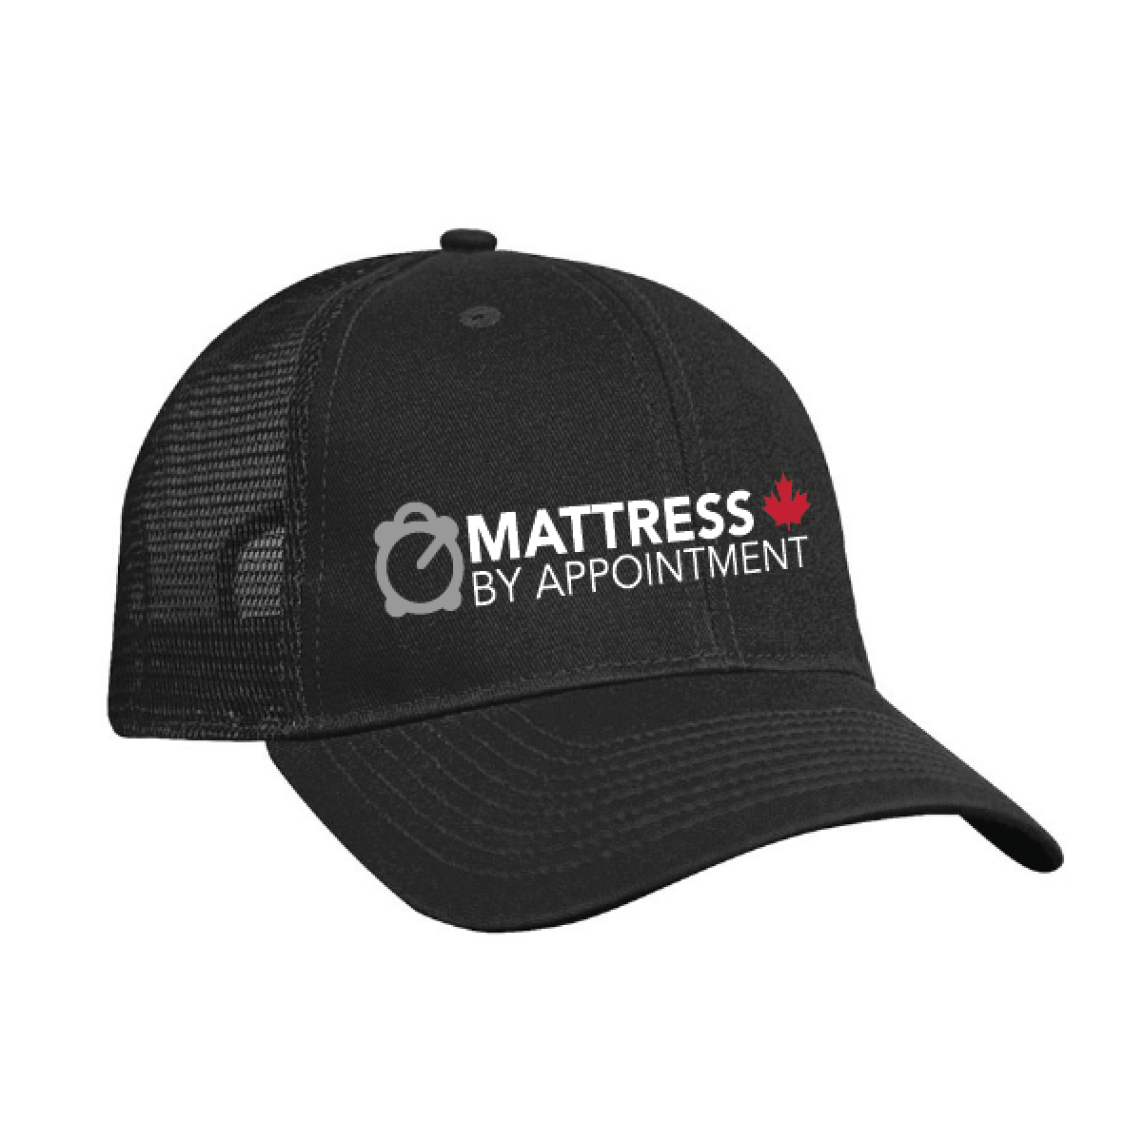 Mattress By Appointment Embroidered Truckers Mesh Cap in Black